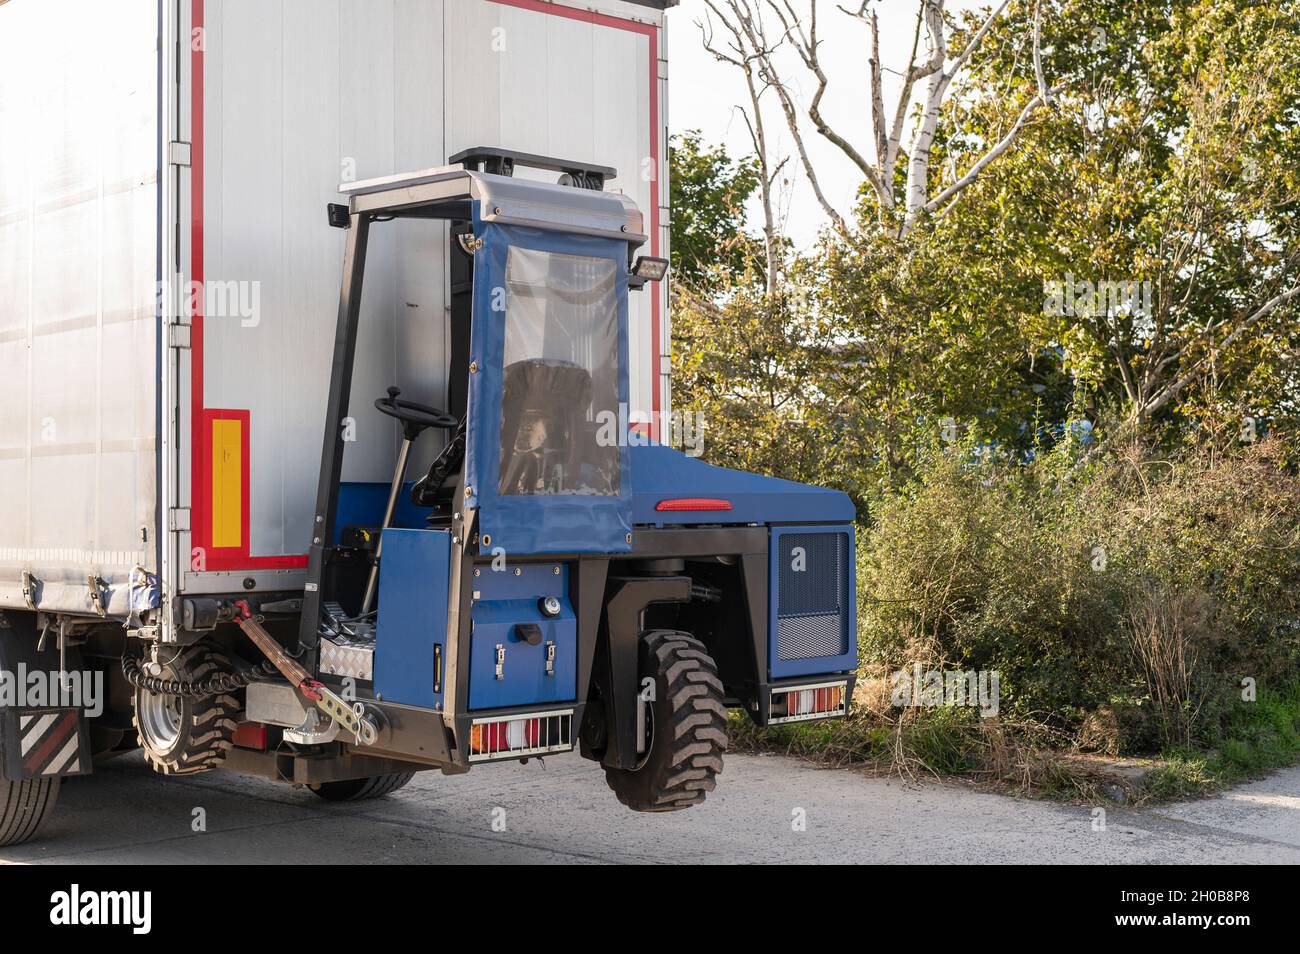 A truck-mounted forklift is attached to the truck Stock Photo